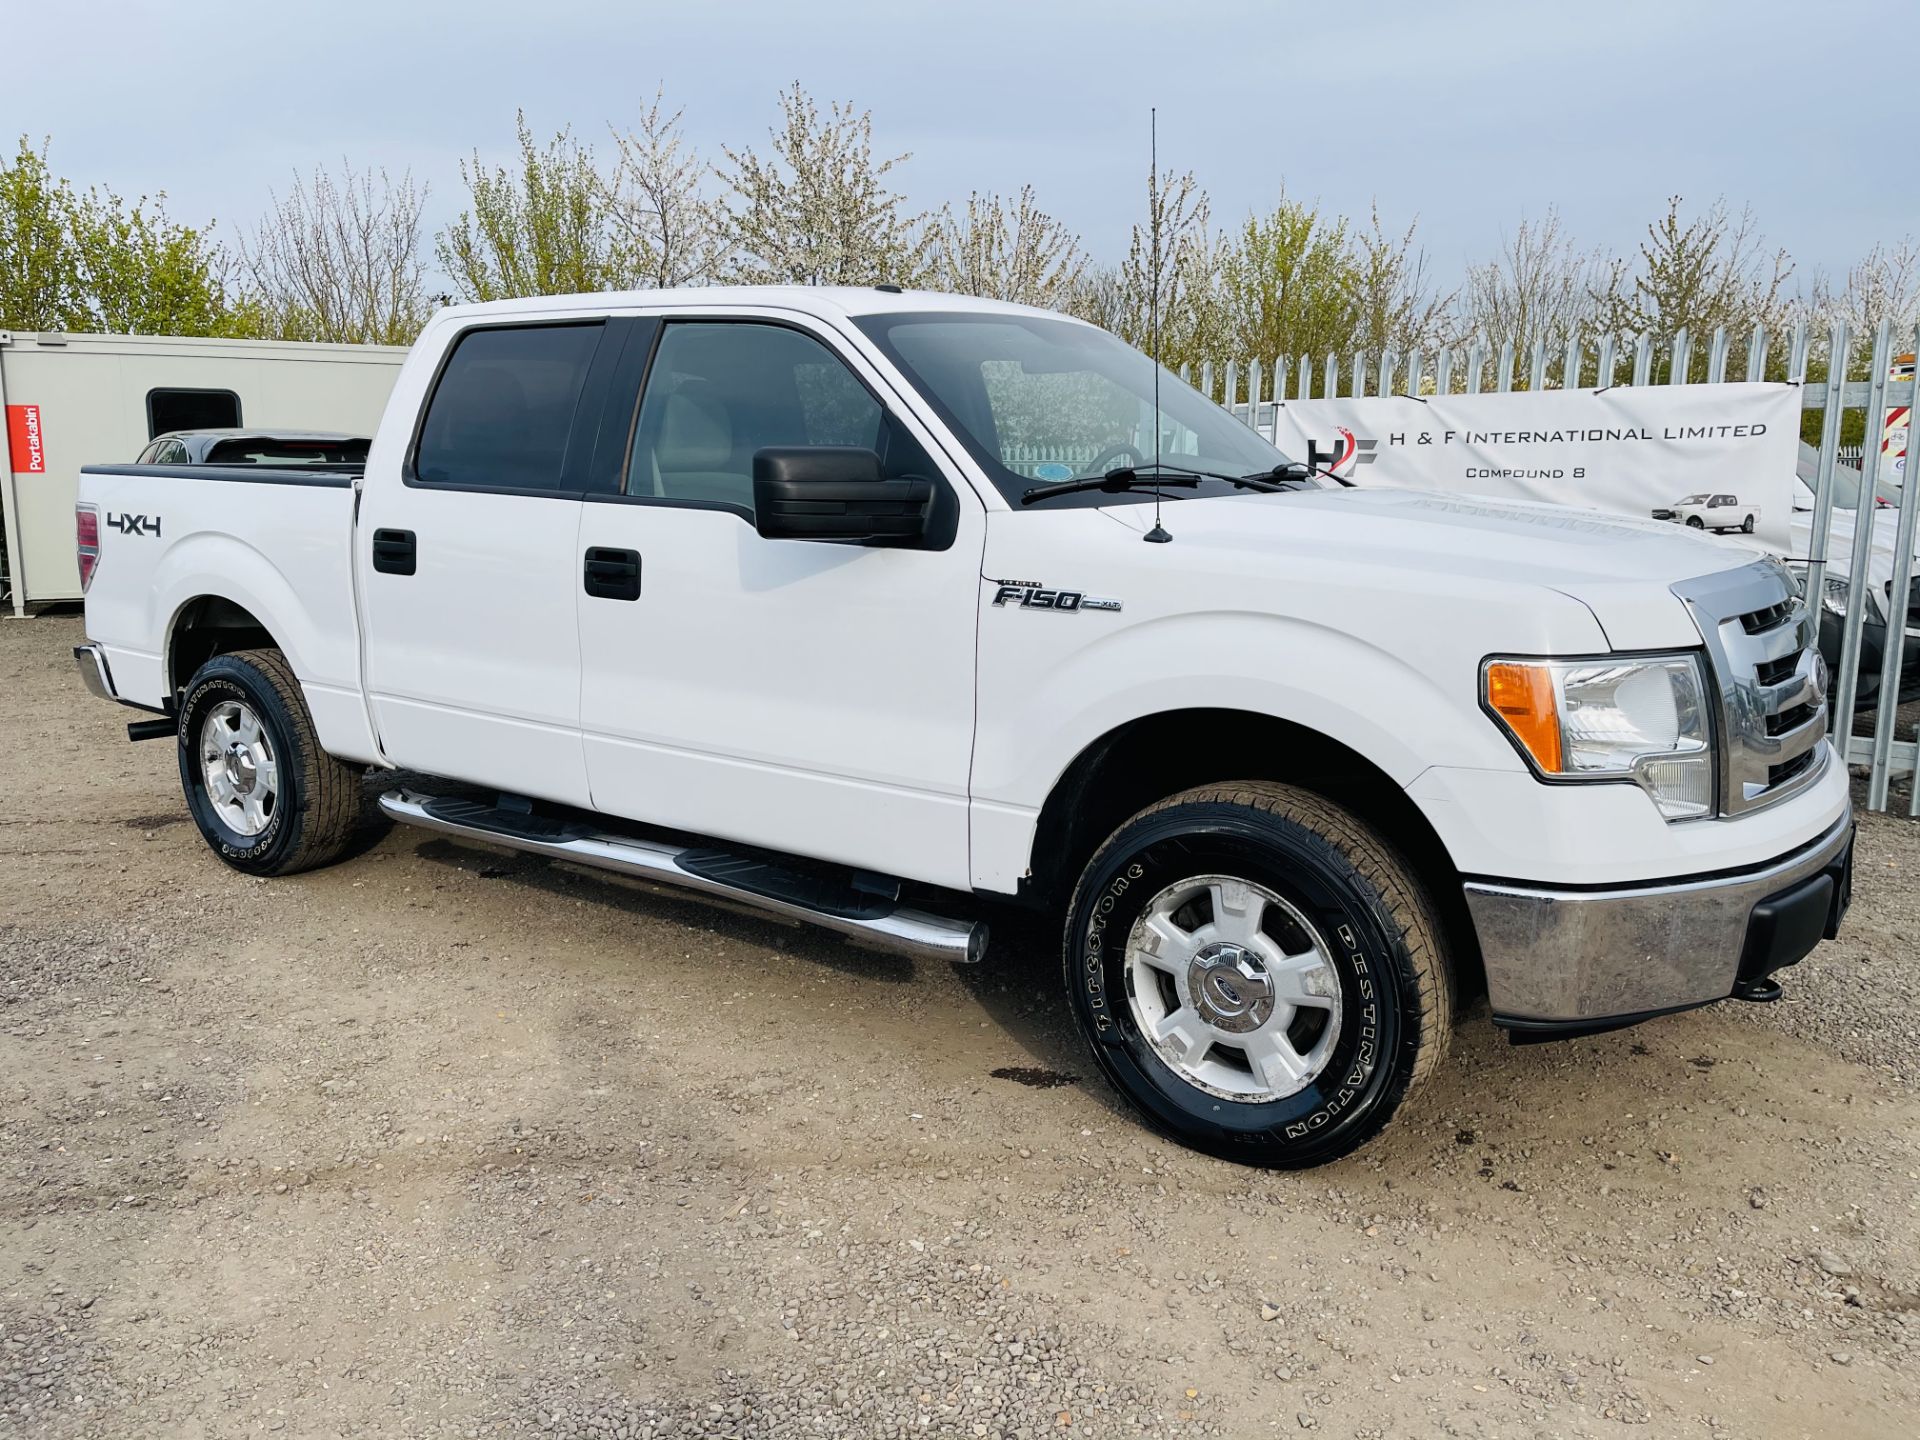 Ford F-150 XLT 4.6L V8 Super-crew 4WD 2010 ' 2010 Year' 6 Seats - Air con - NO RESERVE - Image 18 of 24